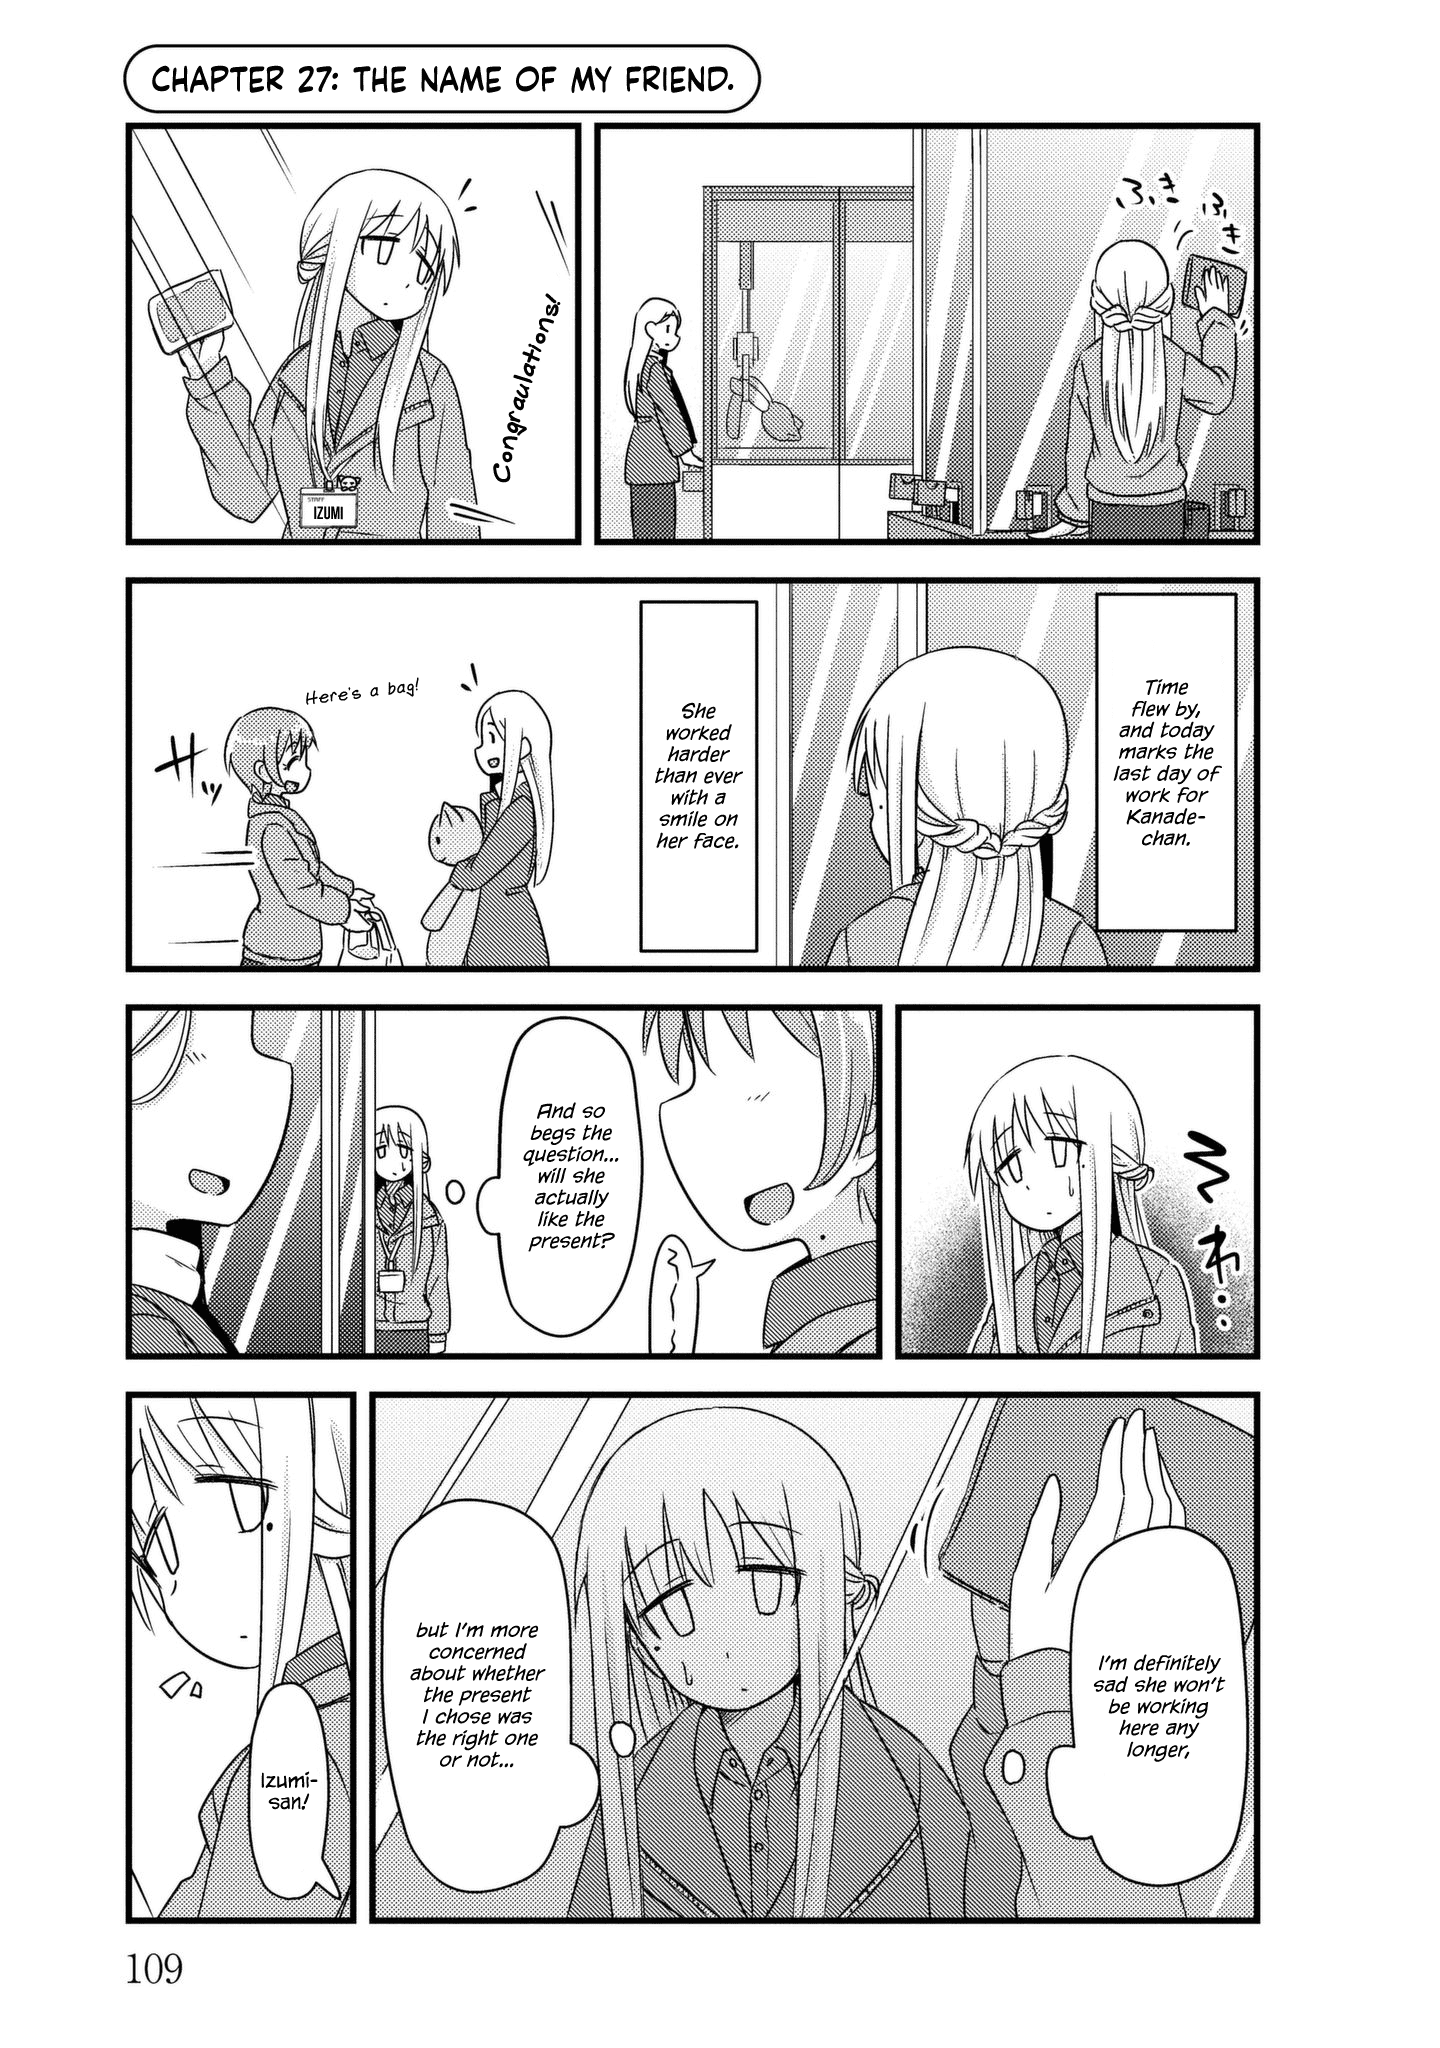 She Doesn't Know Why She Lives - Page 1